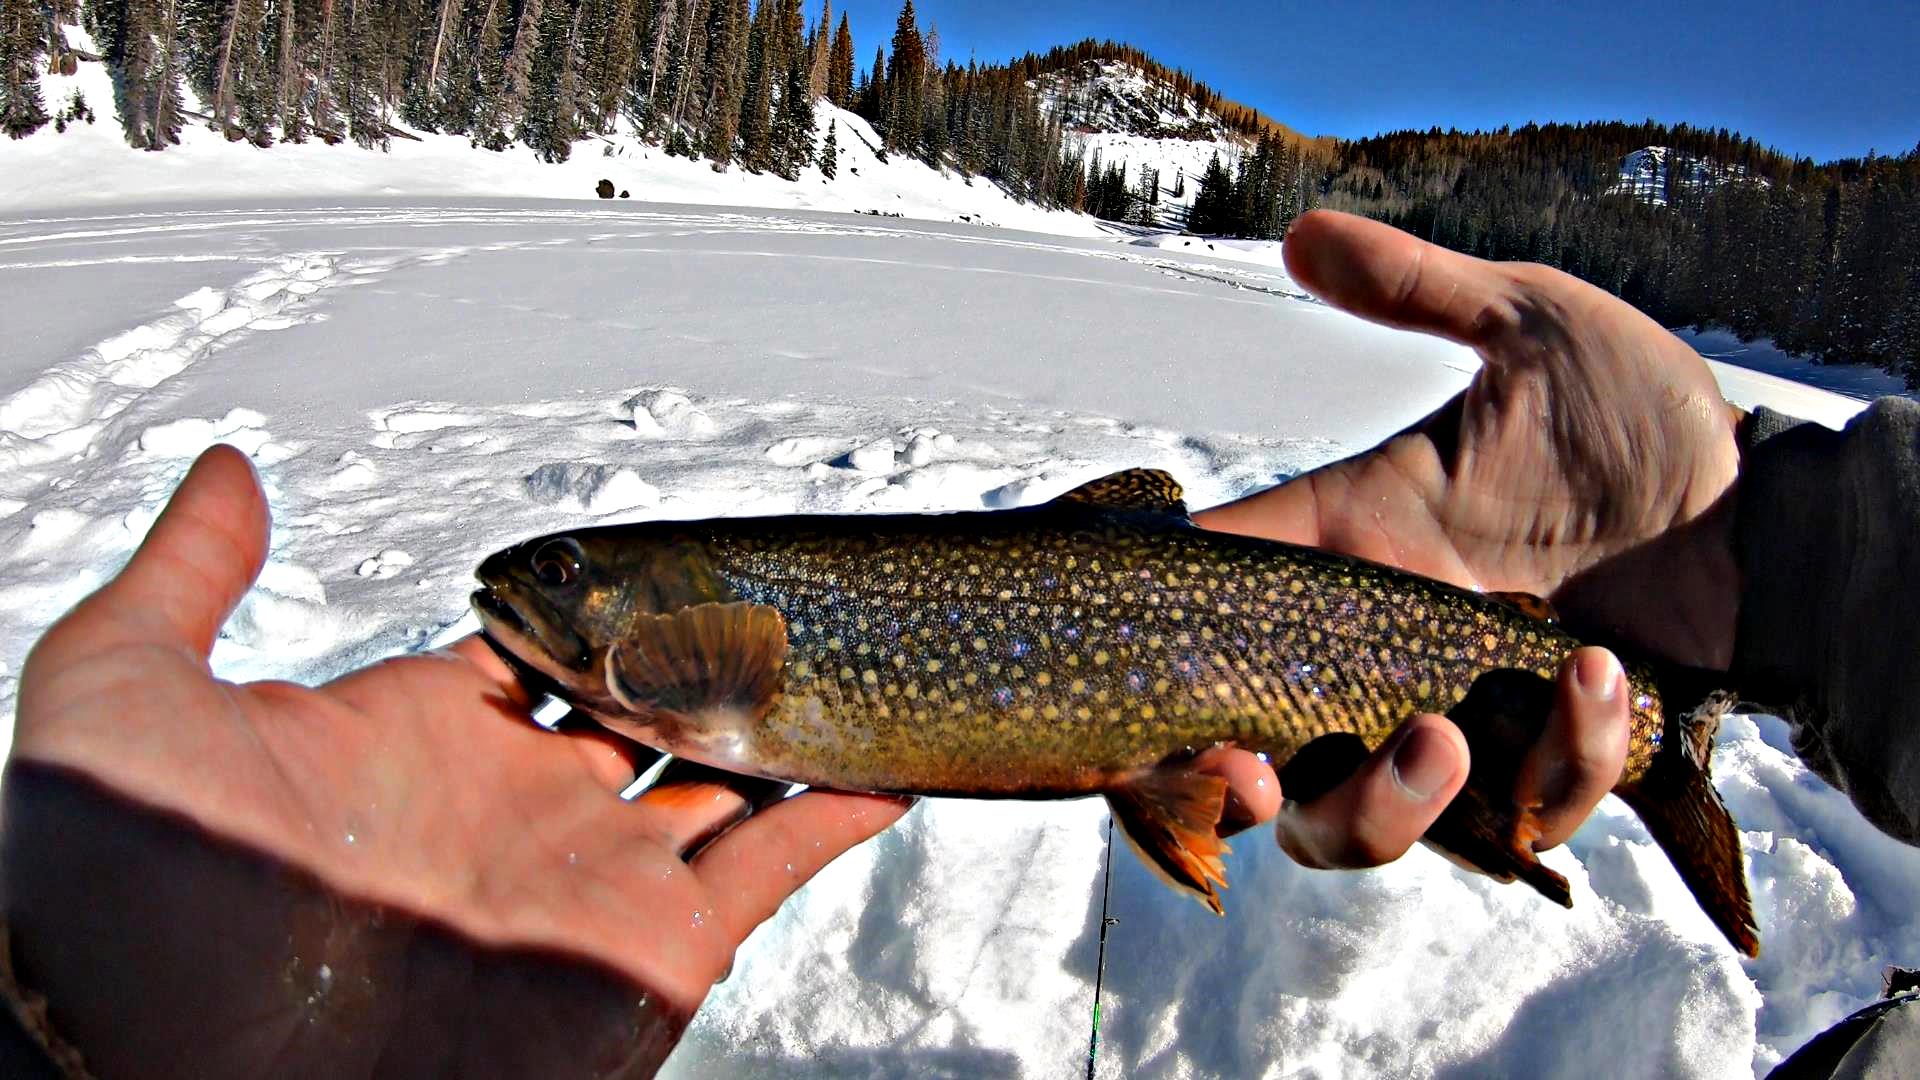 Brookies, Bows, and Cutbows for dinner - Ice Fishing Forum - Ice Fishing  Forum